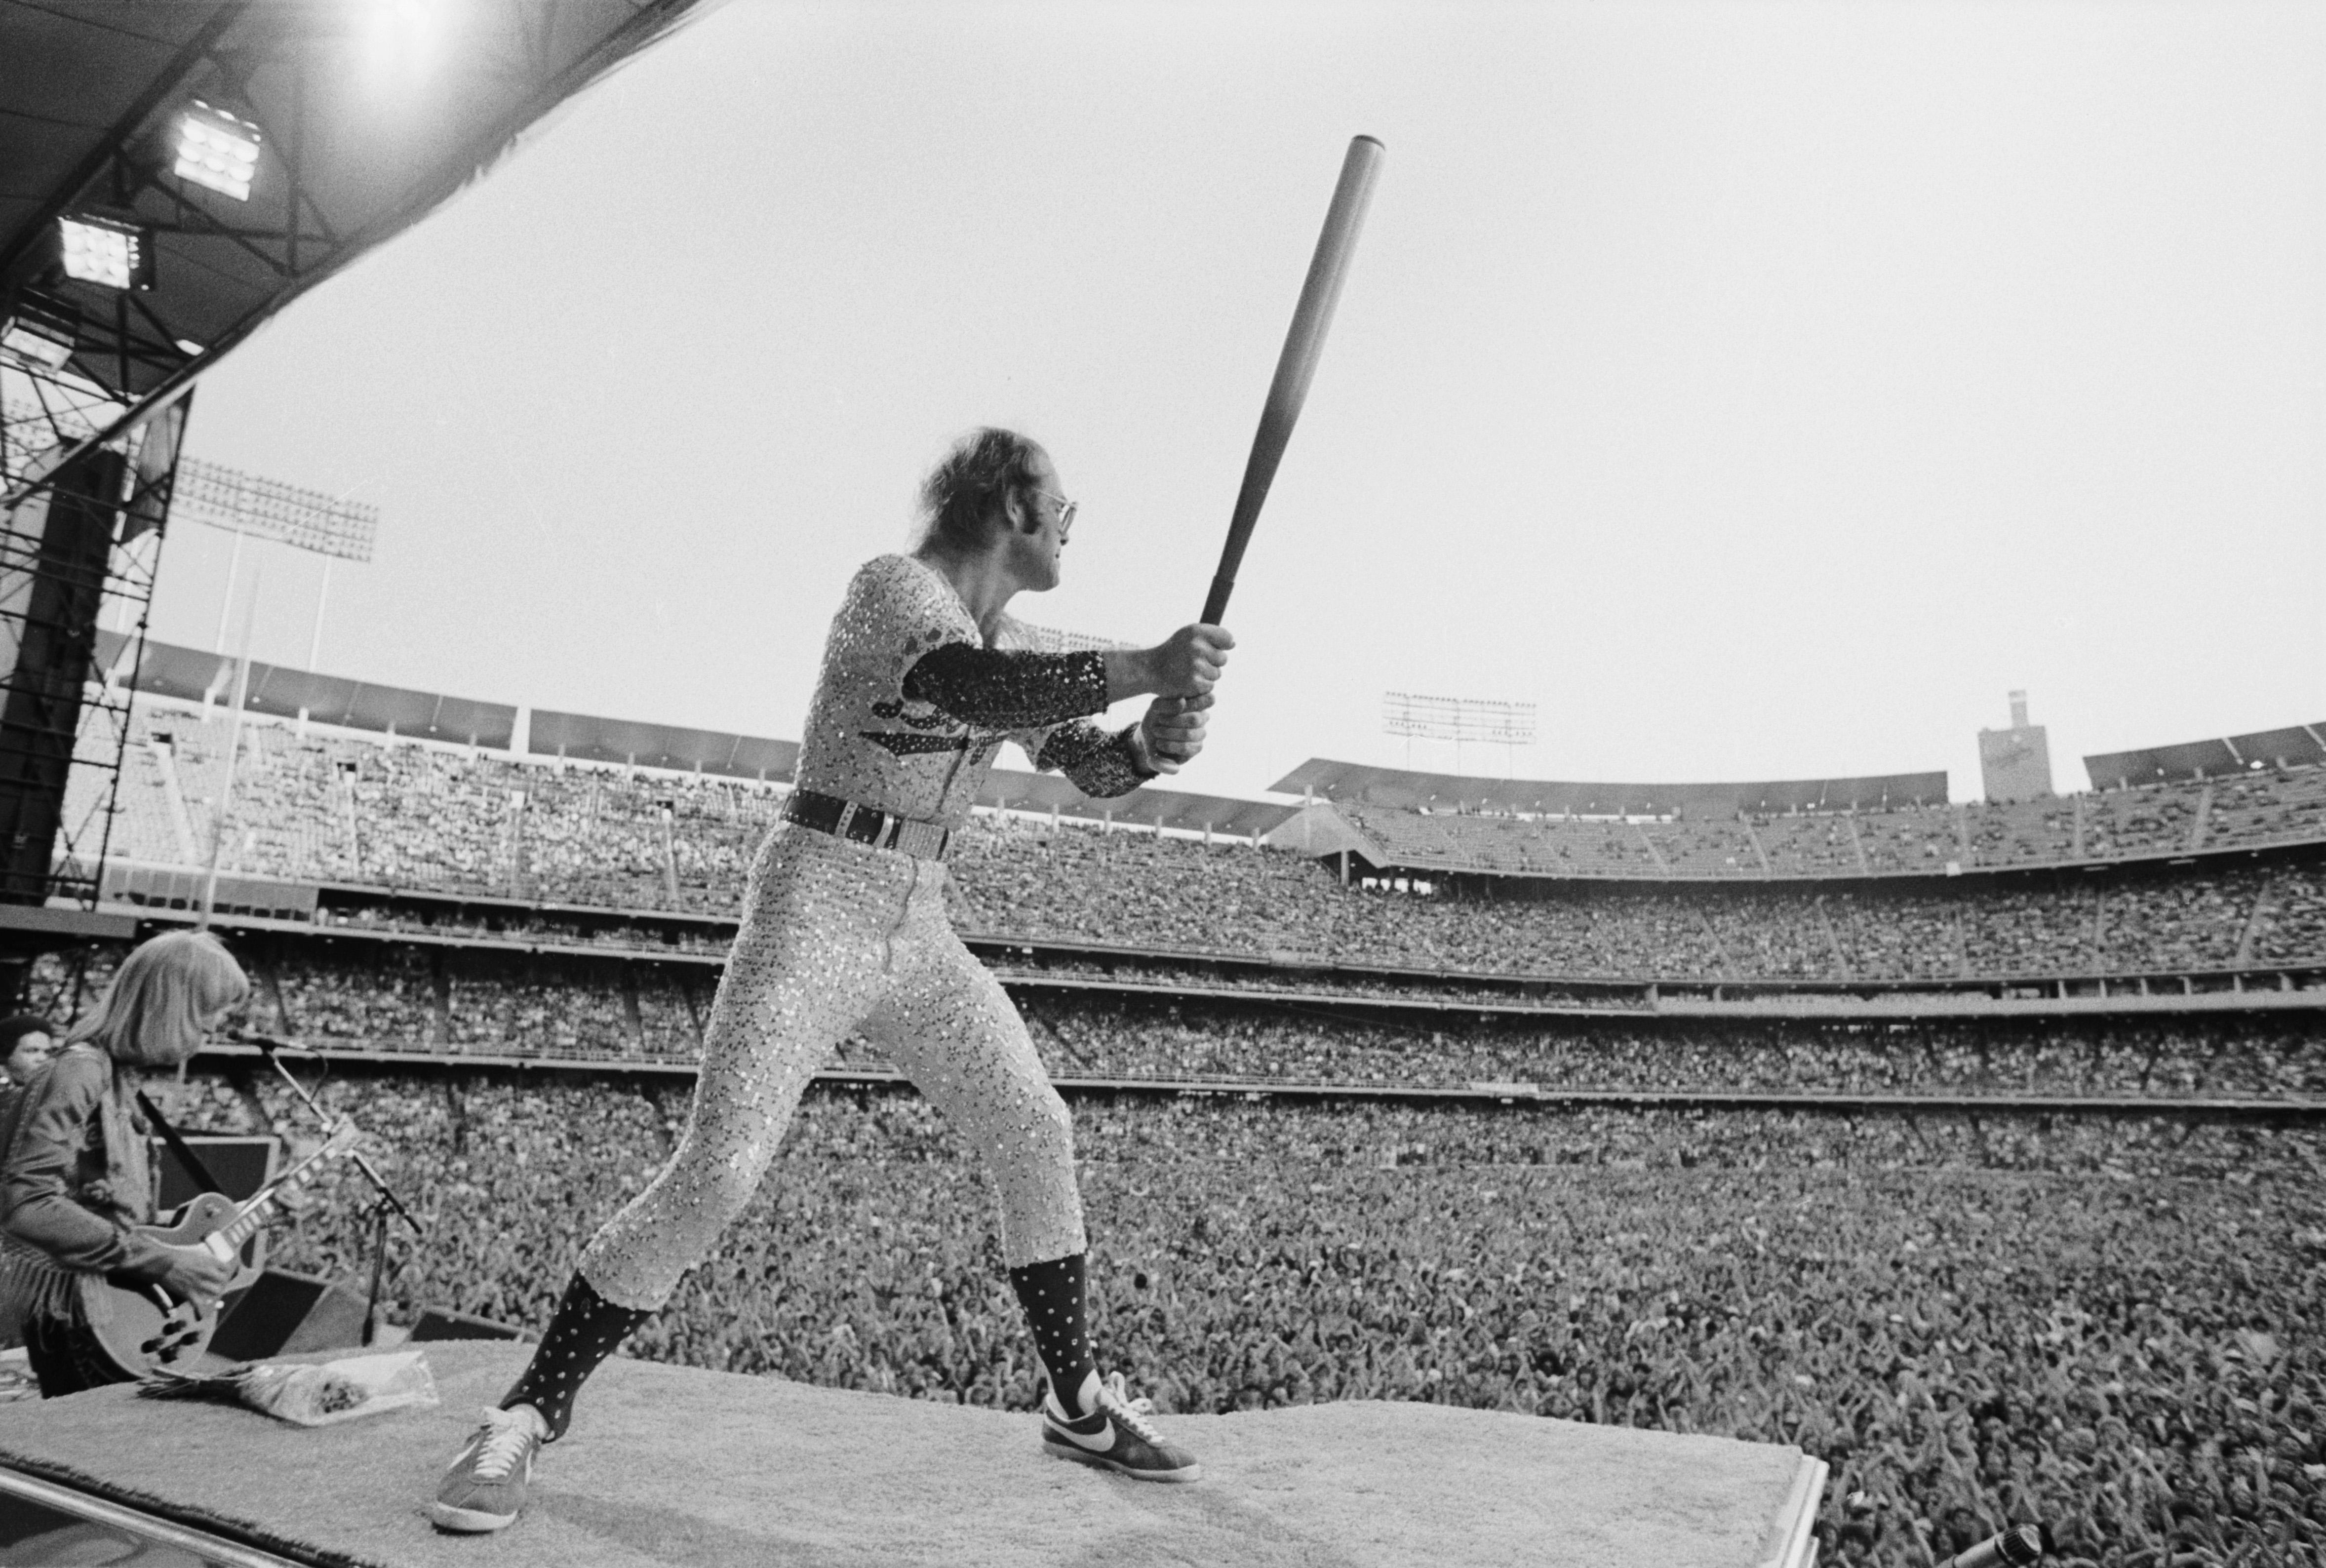 Elton John in Full Swing, Dodger Stadium, Los Angeles, 1975 - Terry O'Neill
Signed and numbered
Silver gelatin print

Available in the following sizes:
12 x 16 inches, edition of 50 + 10 APs
16 x 20 inches, edition of 50 + 10 APs
20 x 24 inches,